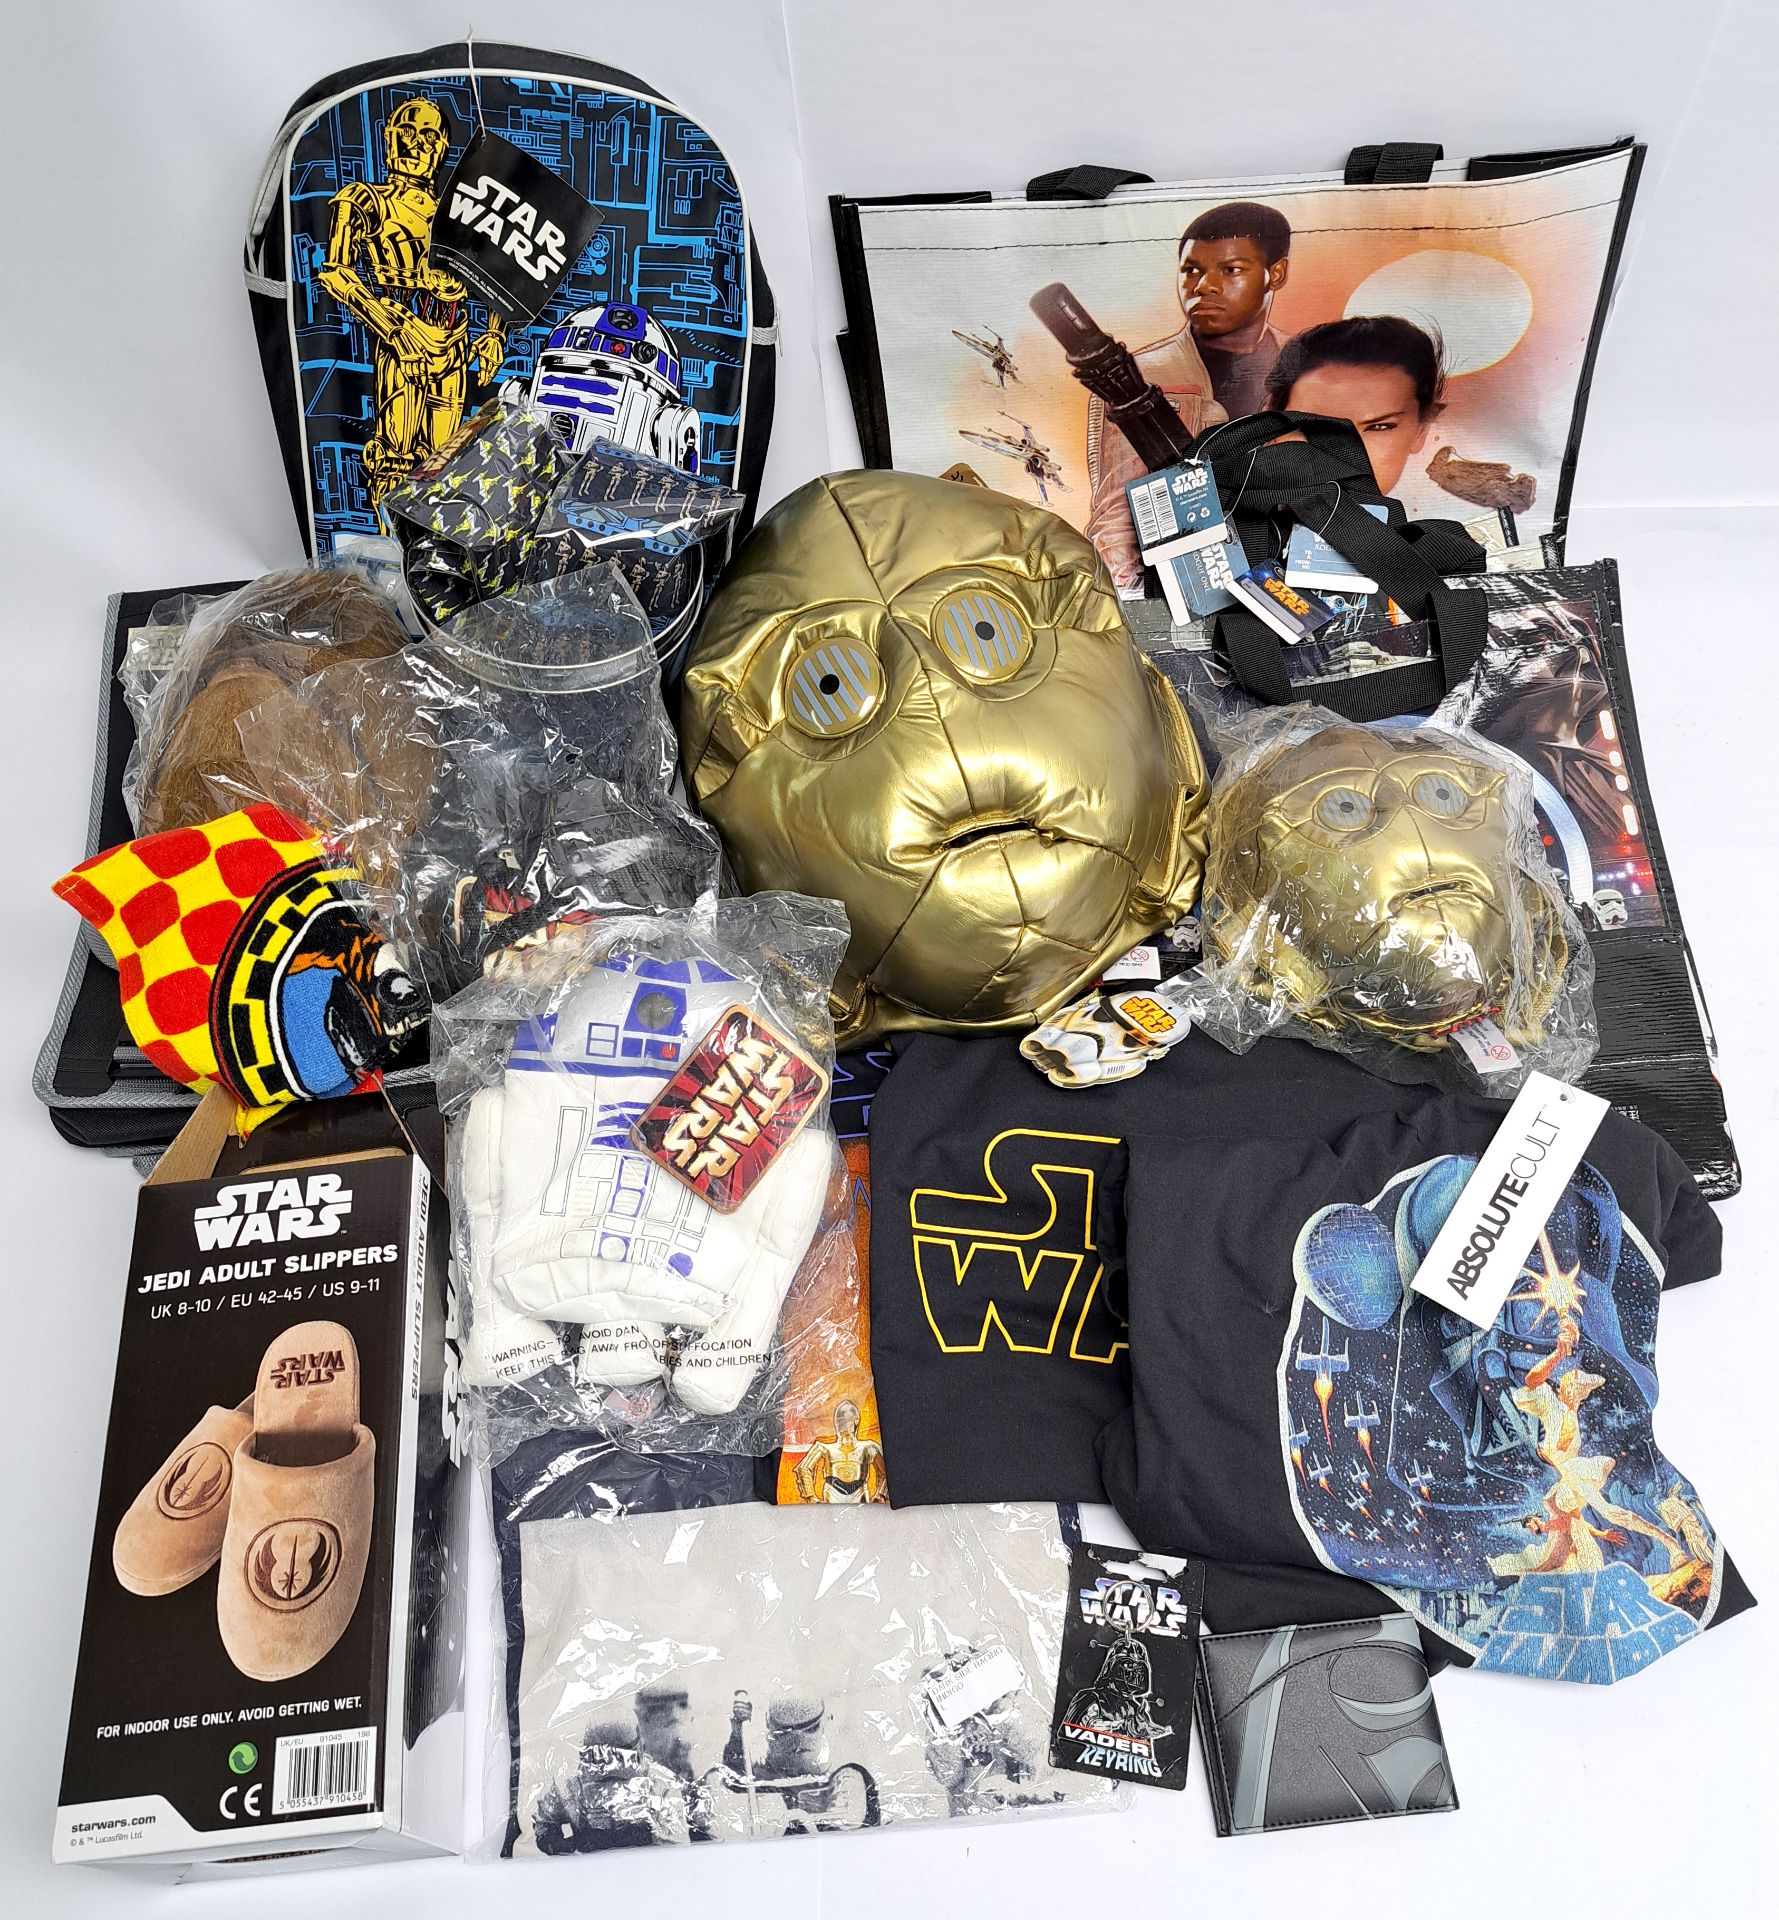 Giftware, Bluebird and similar Star Wars clothes and wearable assortment. Mint to near mint